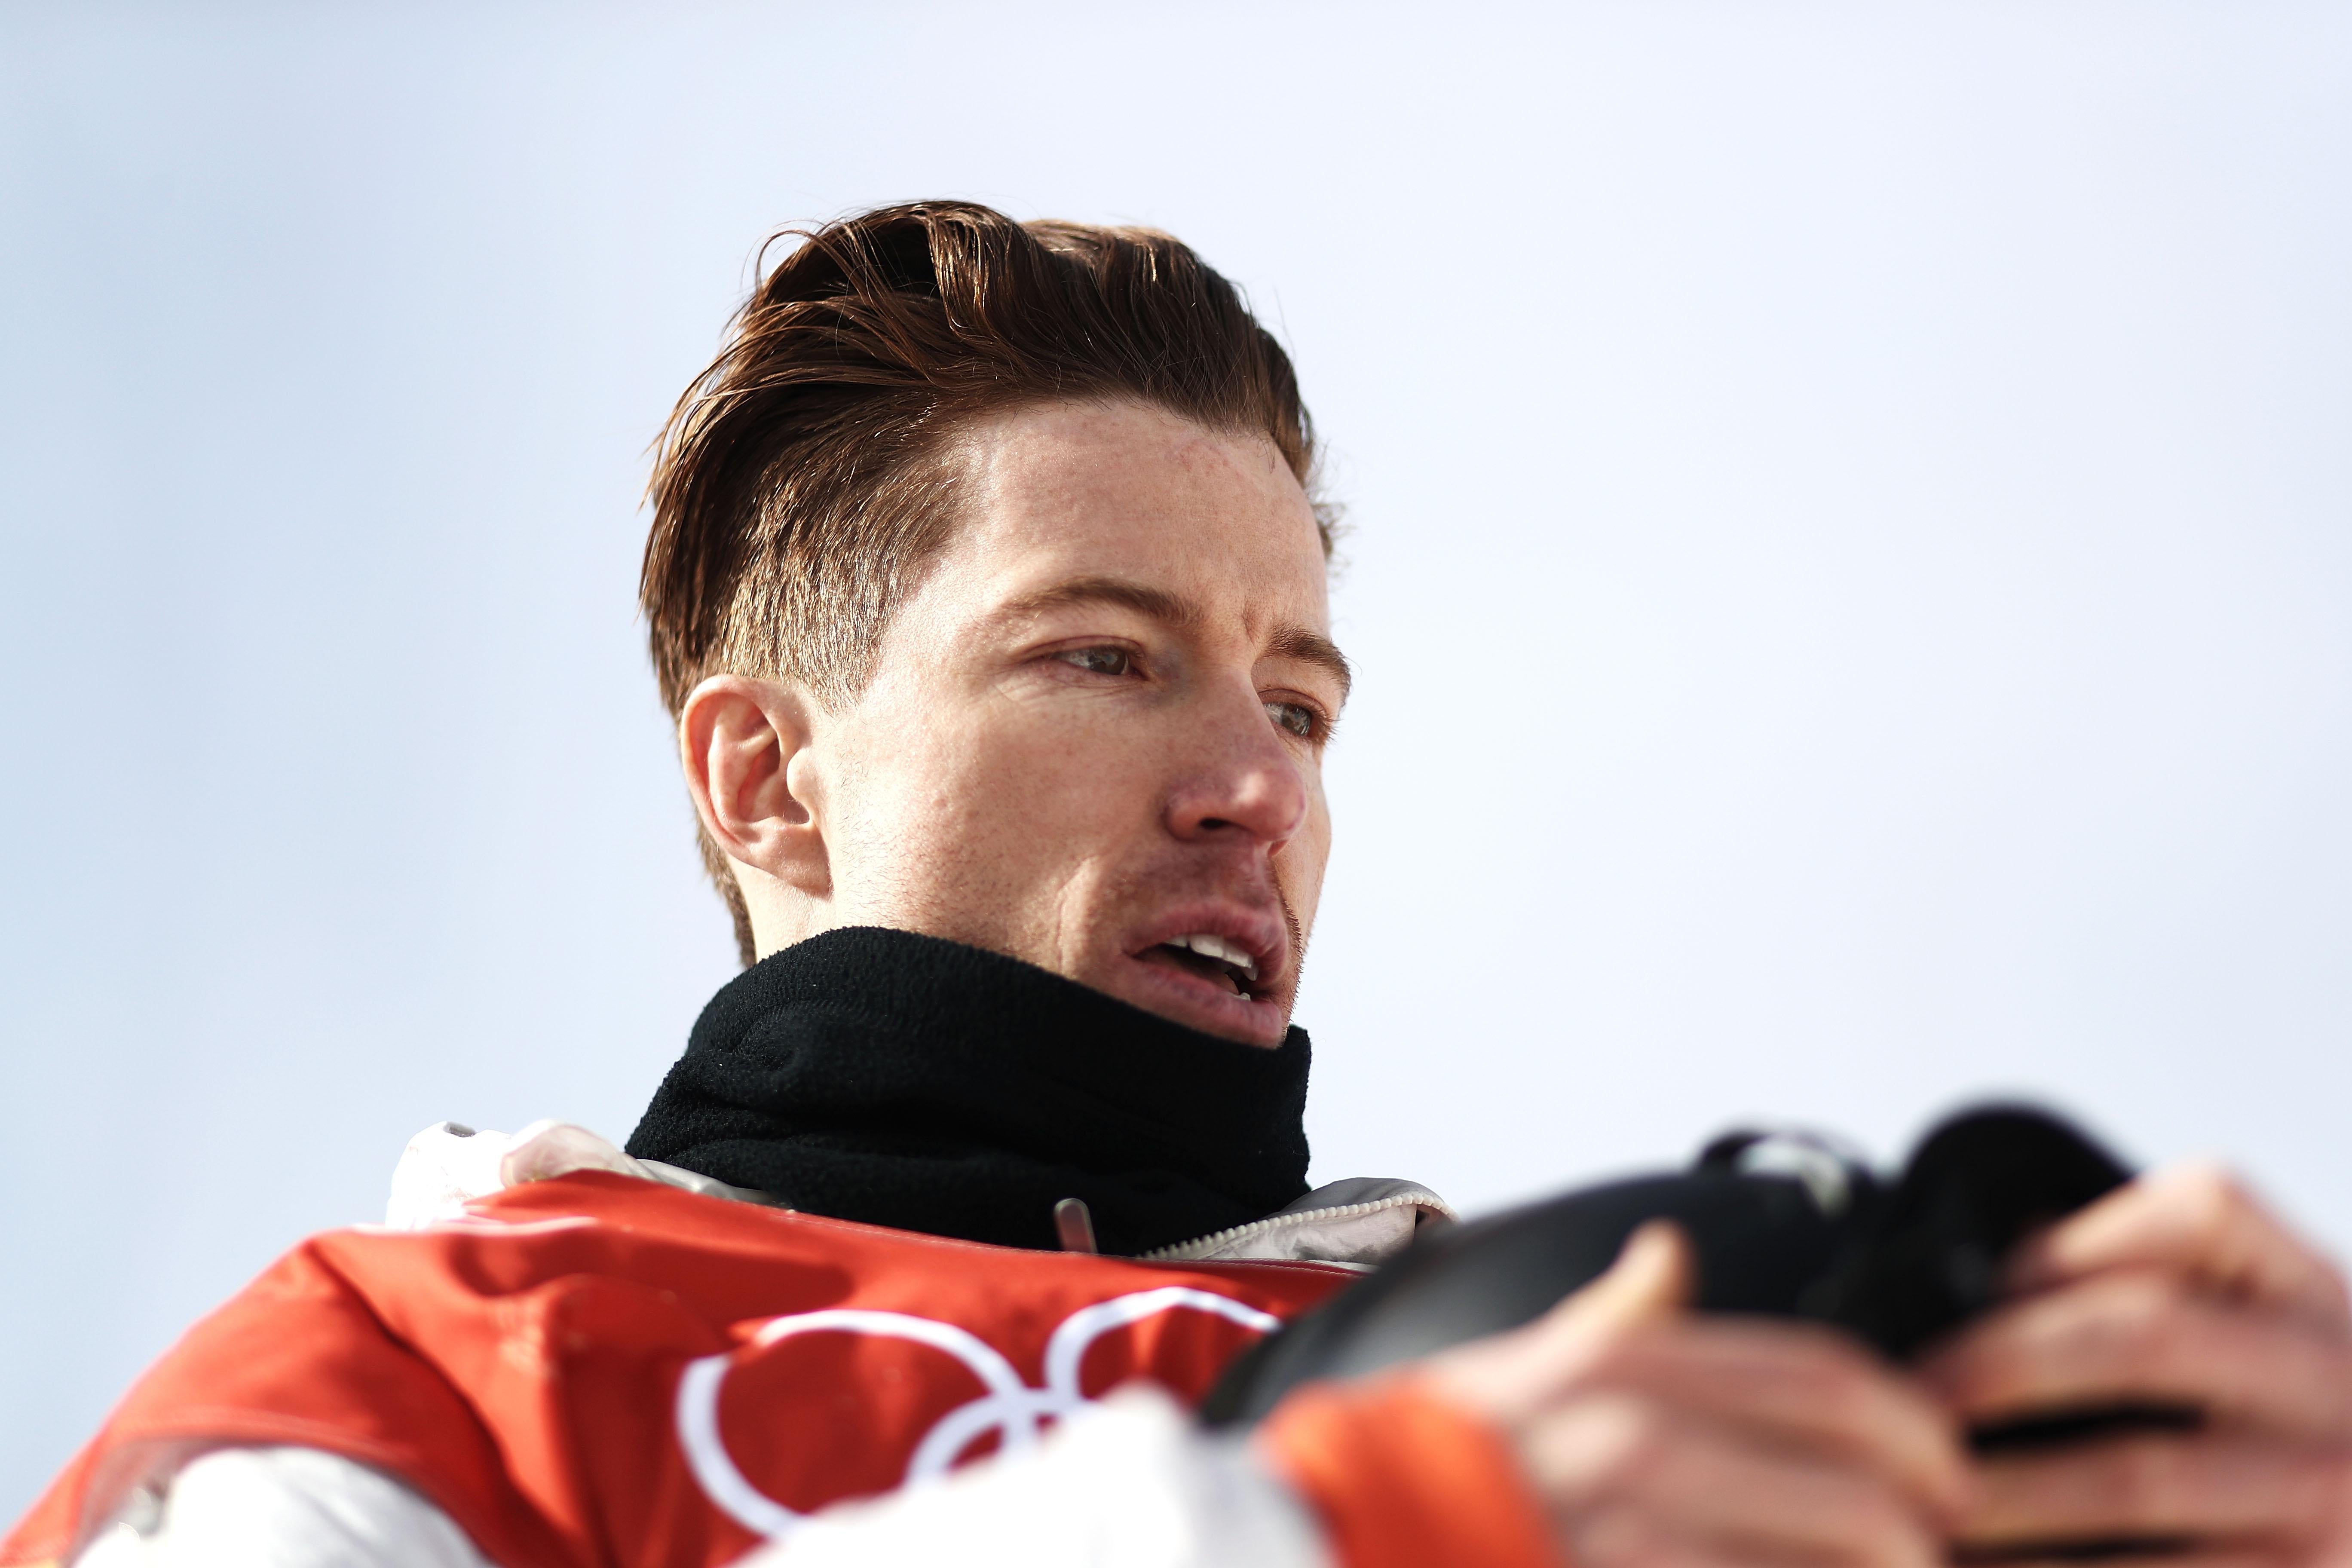 PYEONGCHANG-GUN, SOUTH KOREA - FEBRUARY 13:  Shaun White of the United States reacts after his run during the Snowboard Men's Halfpipe Qualification on day four of the PyeongChang 2018 Winter Olympic Games at Phoenix Snow Park on February 13, 2018 in Pyeongchang-gun, South Korea.  (Photo by Ryan Pierse/Getty Images)